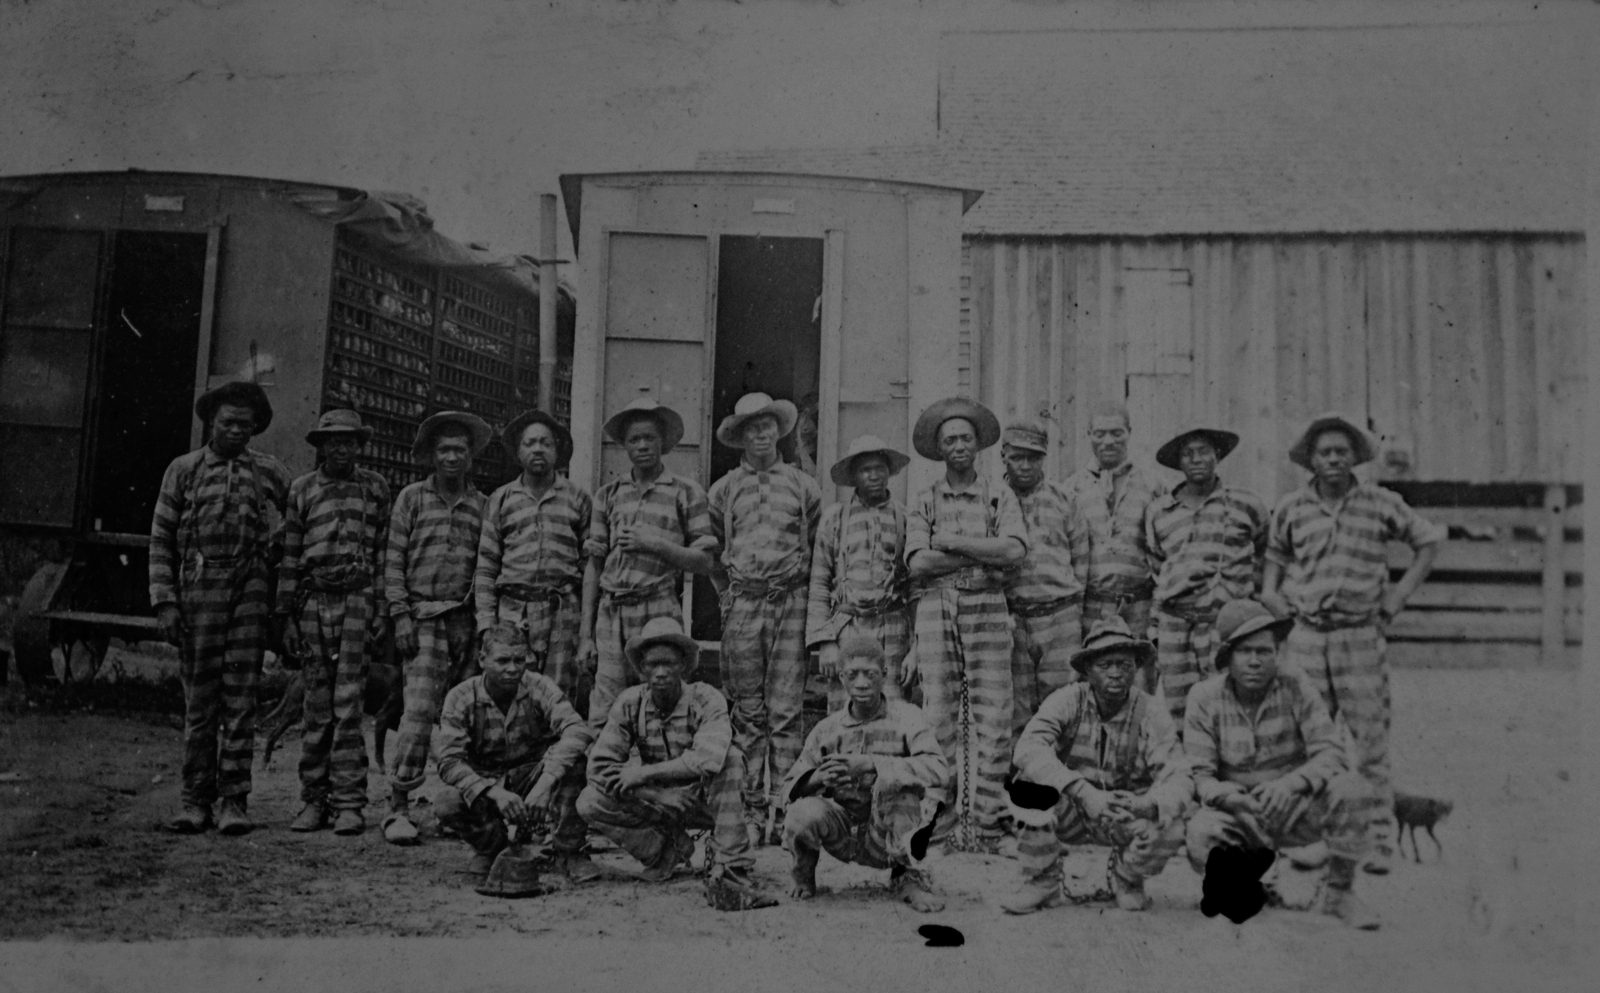 Courtesy of the Van Center Collection. This image is of convicts working in Fairfield County, S.C. during the approximate same time frame.